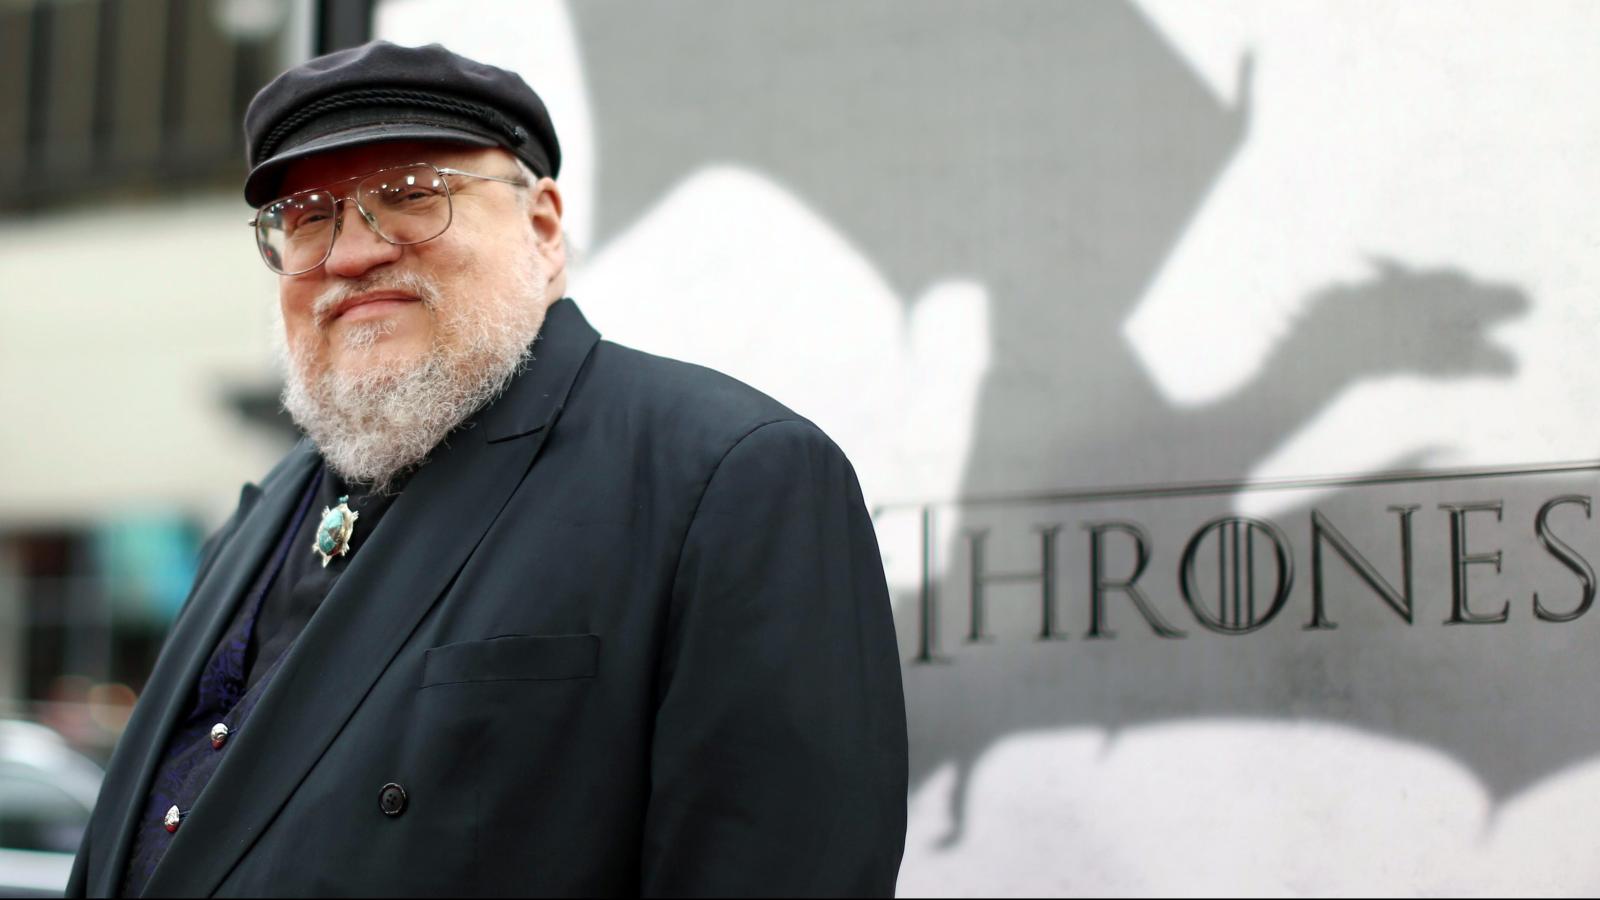 Winds of Winter Release Date Update: George RR Martin gives Mixed Signals on the GOT Book Launch